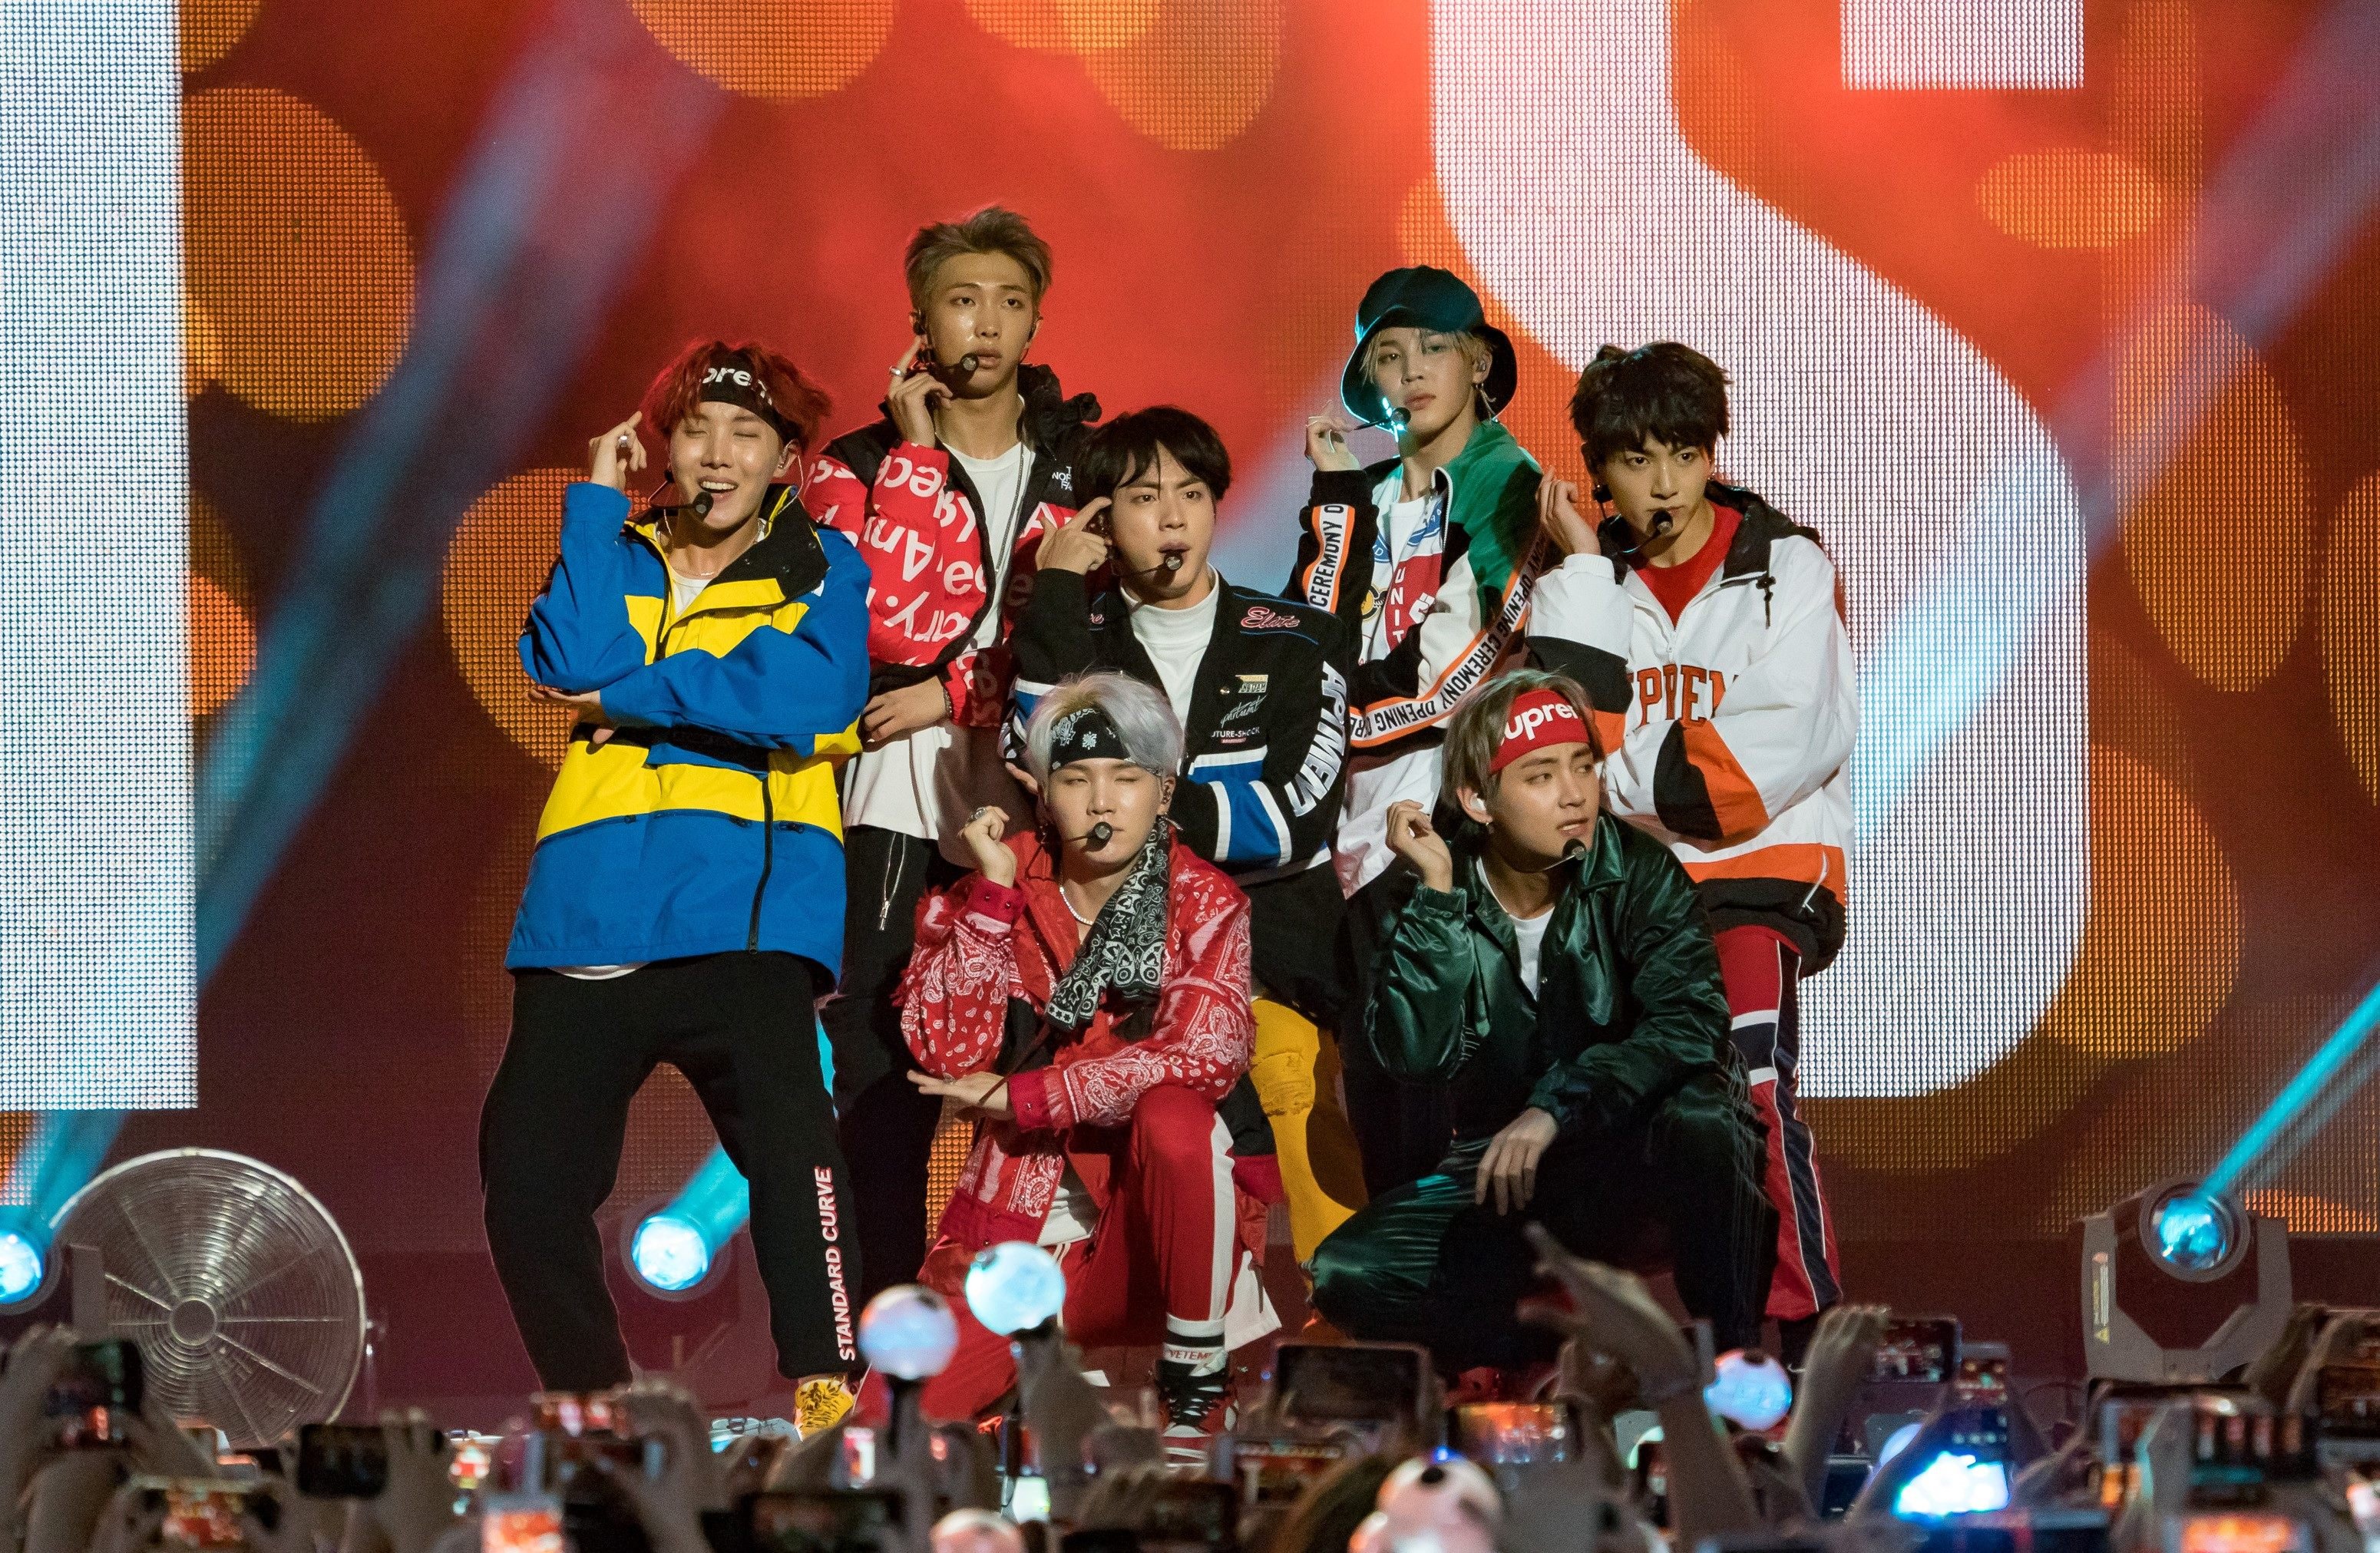 BTS concert: V turns model; ARMY reacts to Jungkook in red jacket